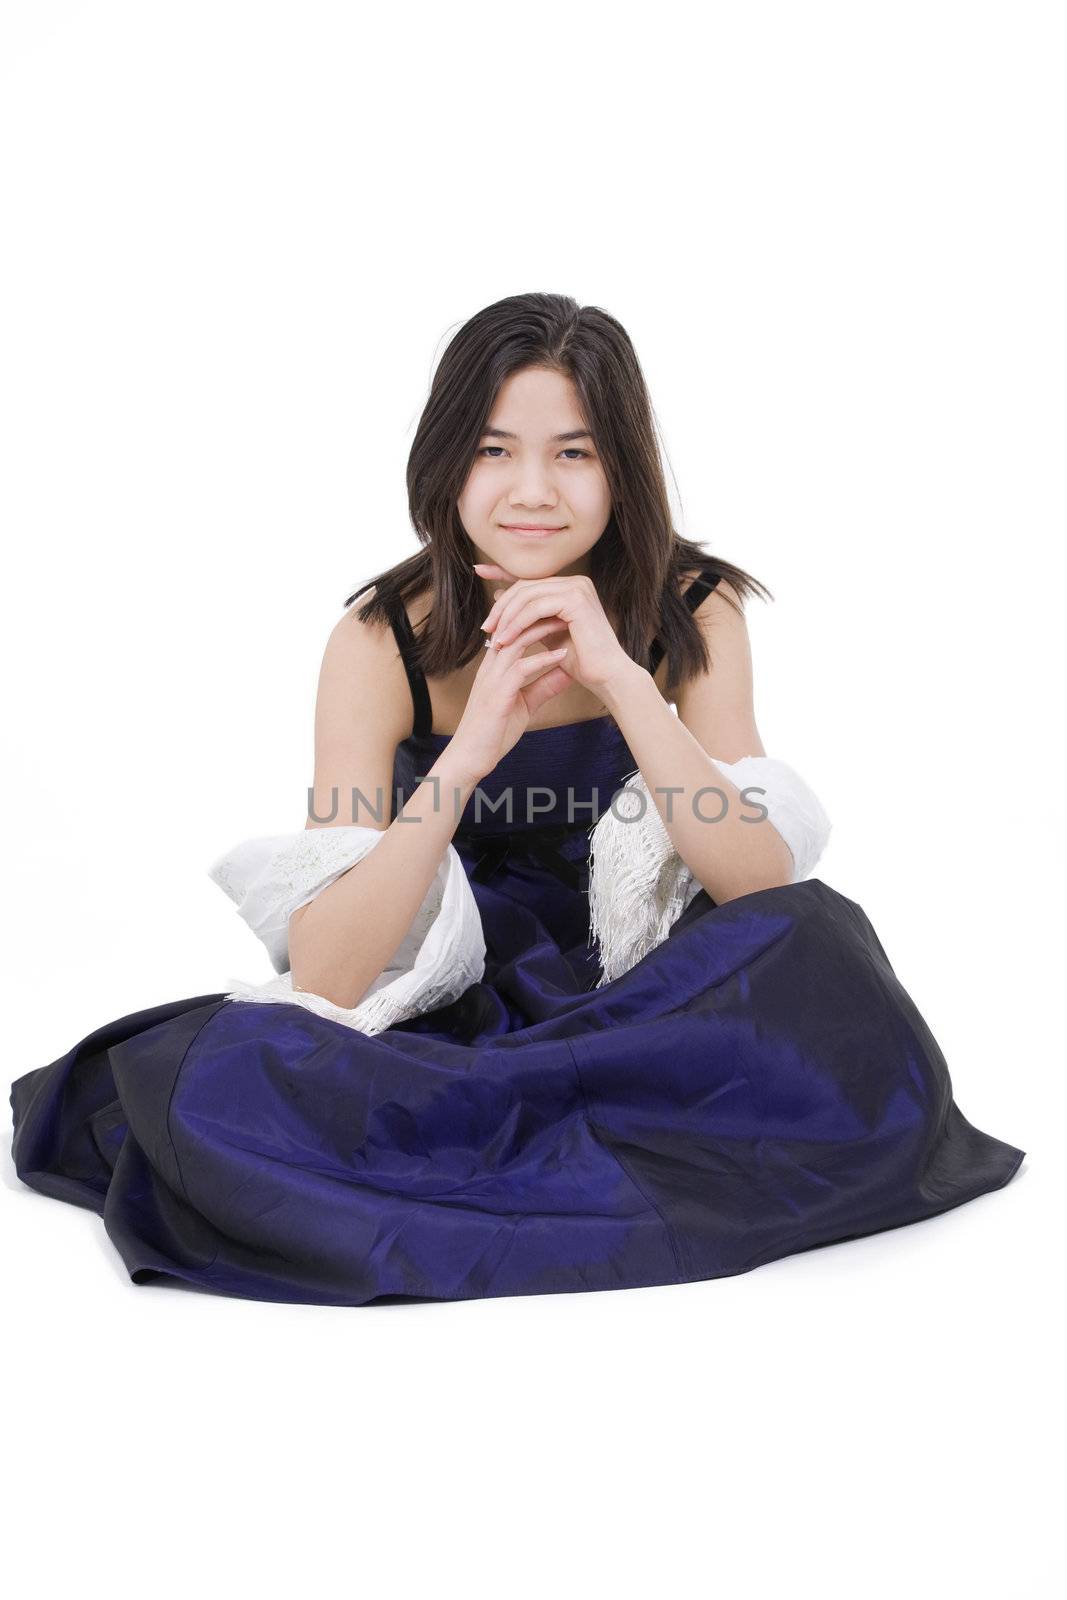 Young teen biracial girl in elegant, dark blue dress gown isolated on white